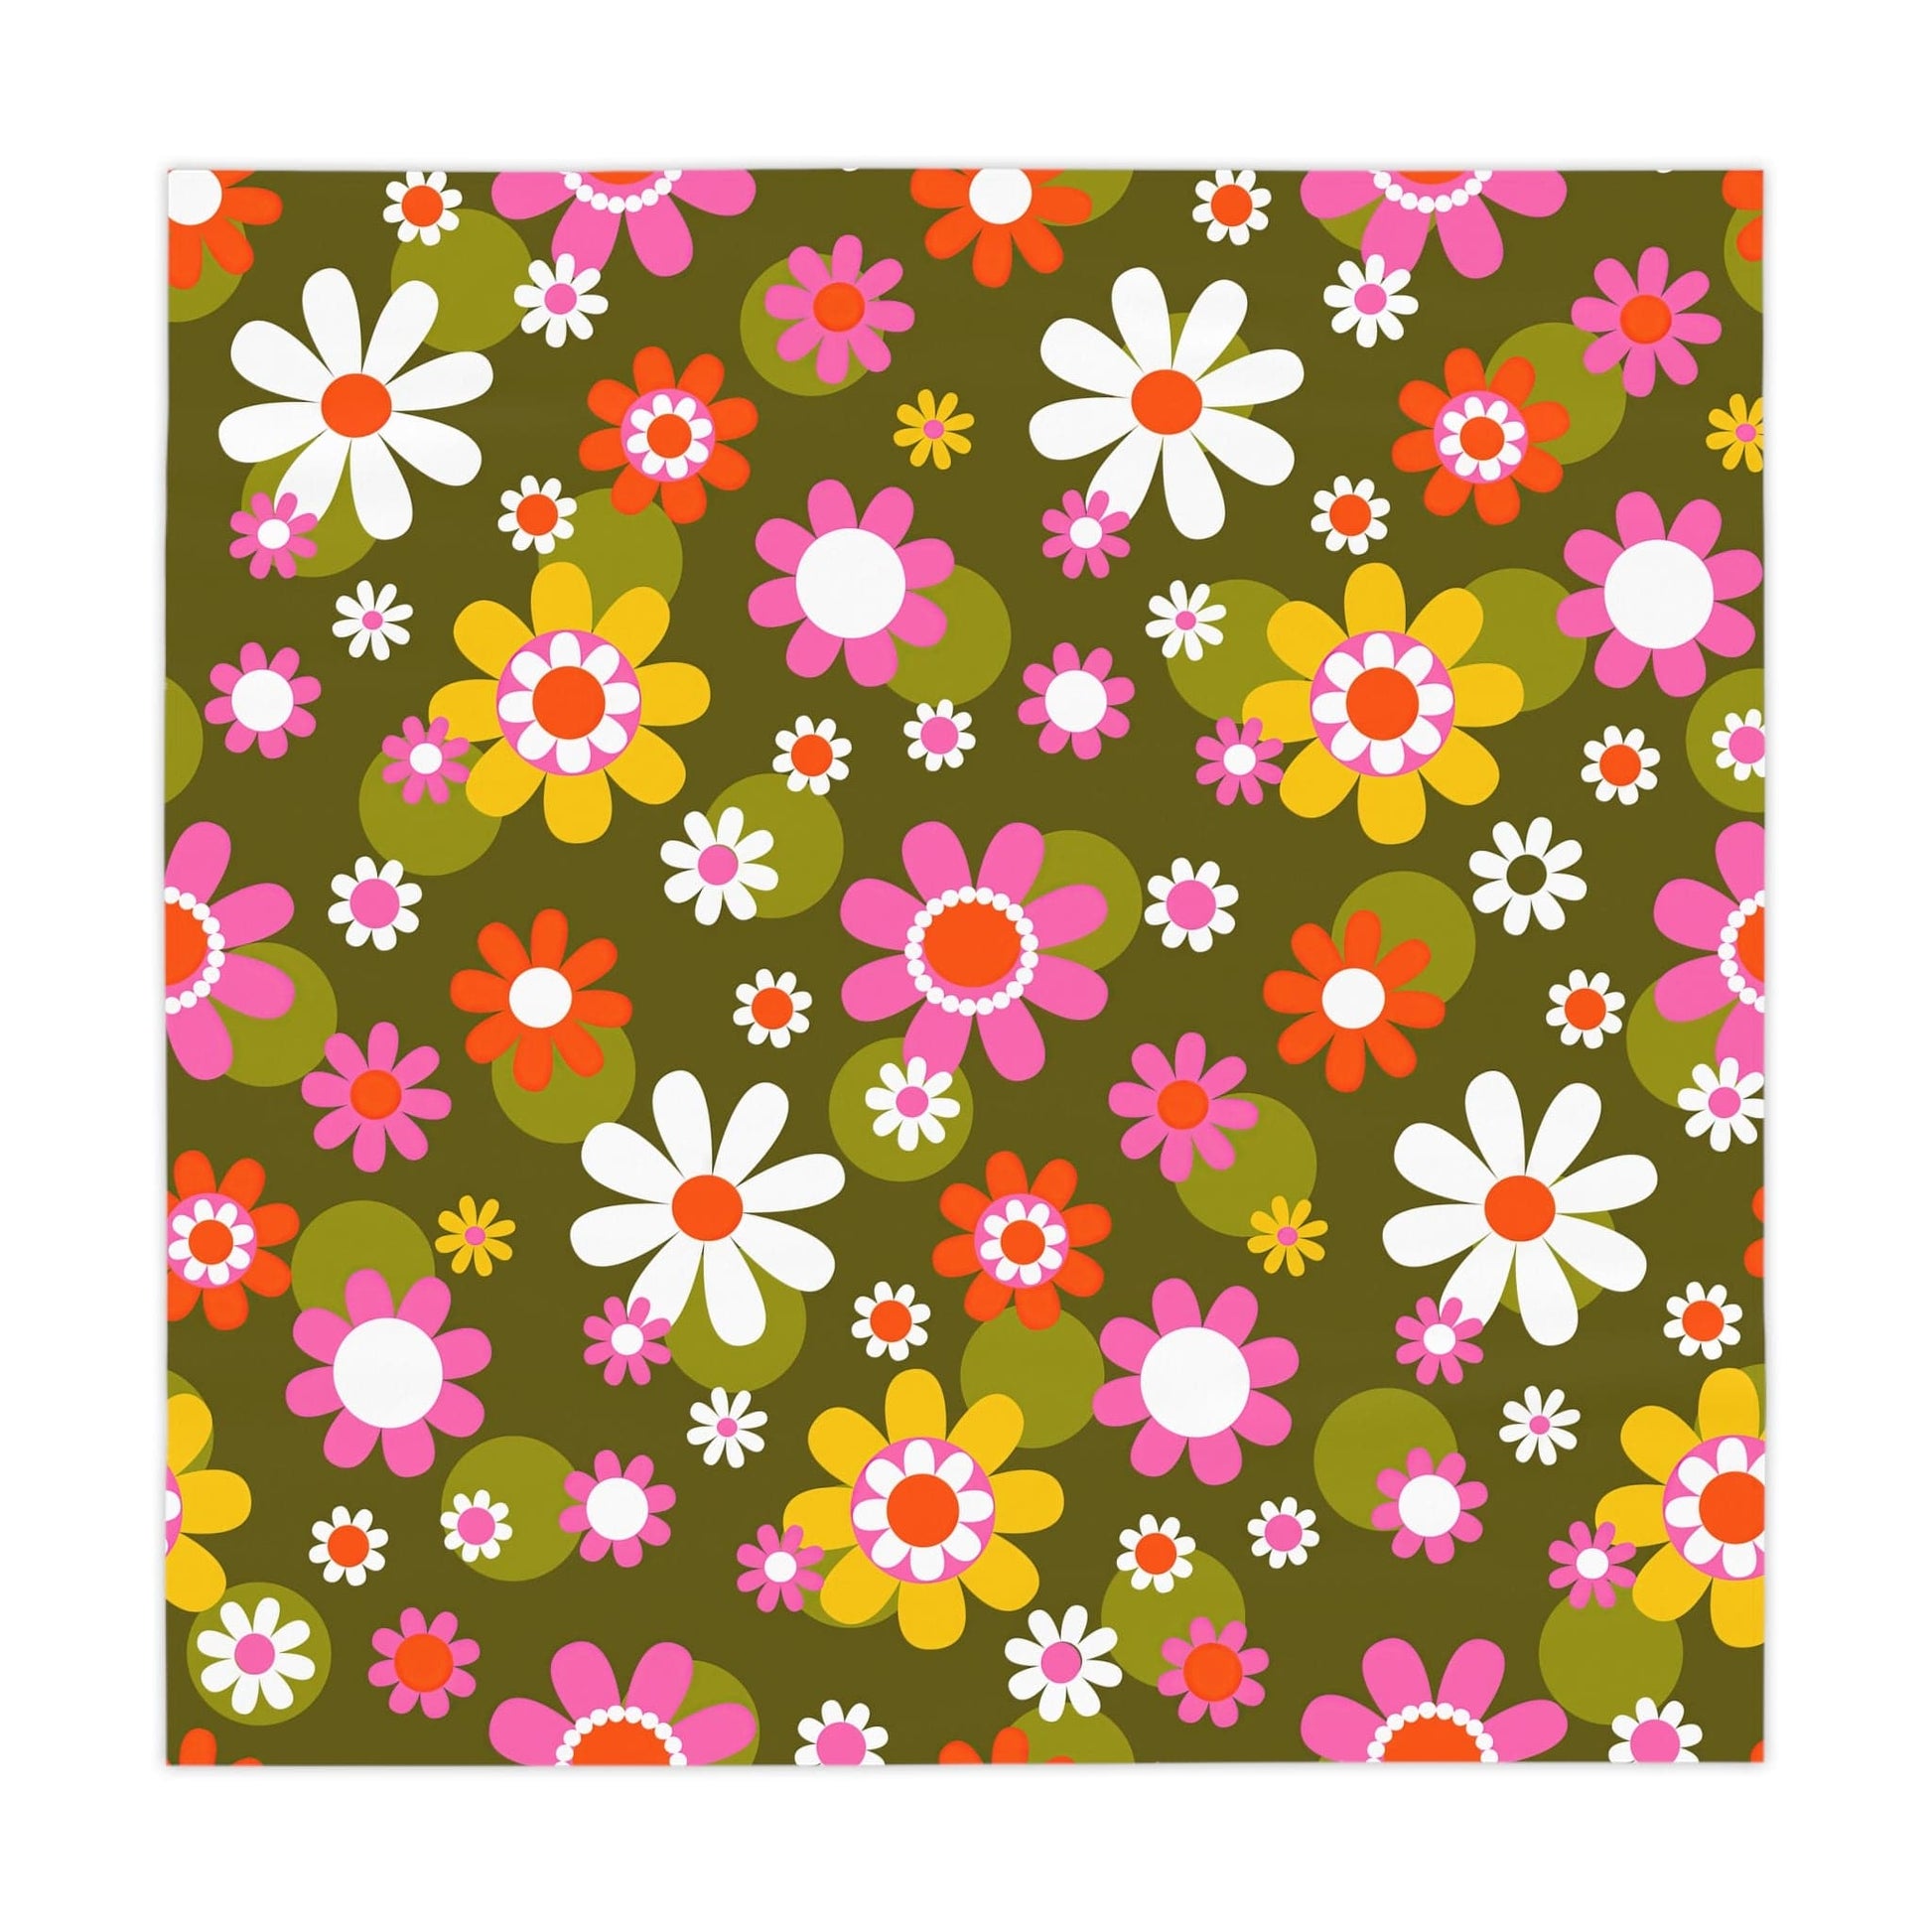 Printify Groovy Hippie Daisy Flower Power Tablecloth, Retro Mid Mod Floral Table Linen, Mid Century Dining Table Decor Home Decor One size / White 16165494938854854770